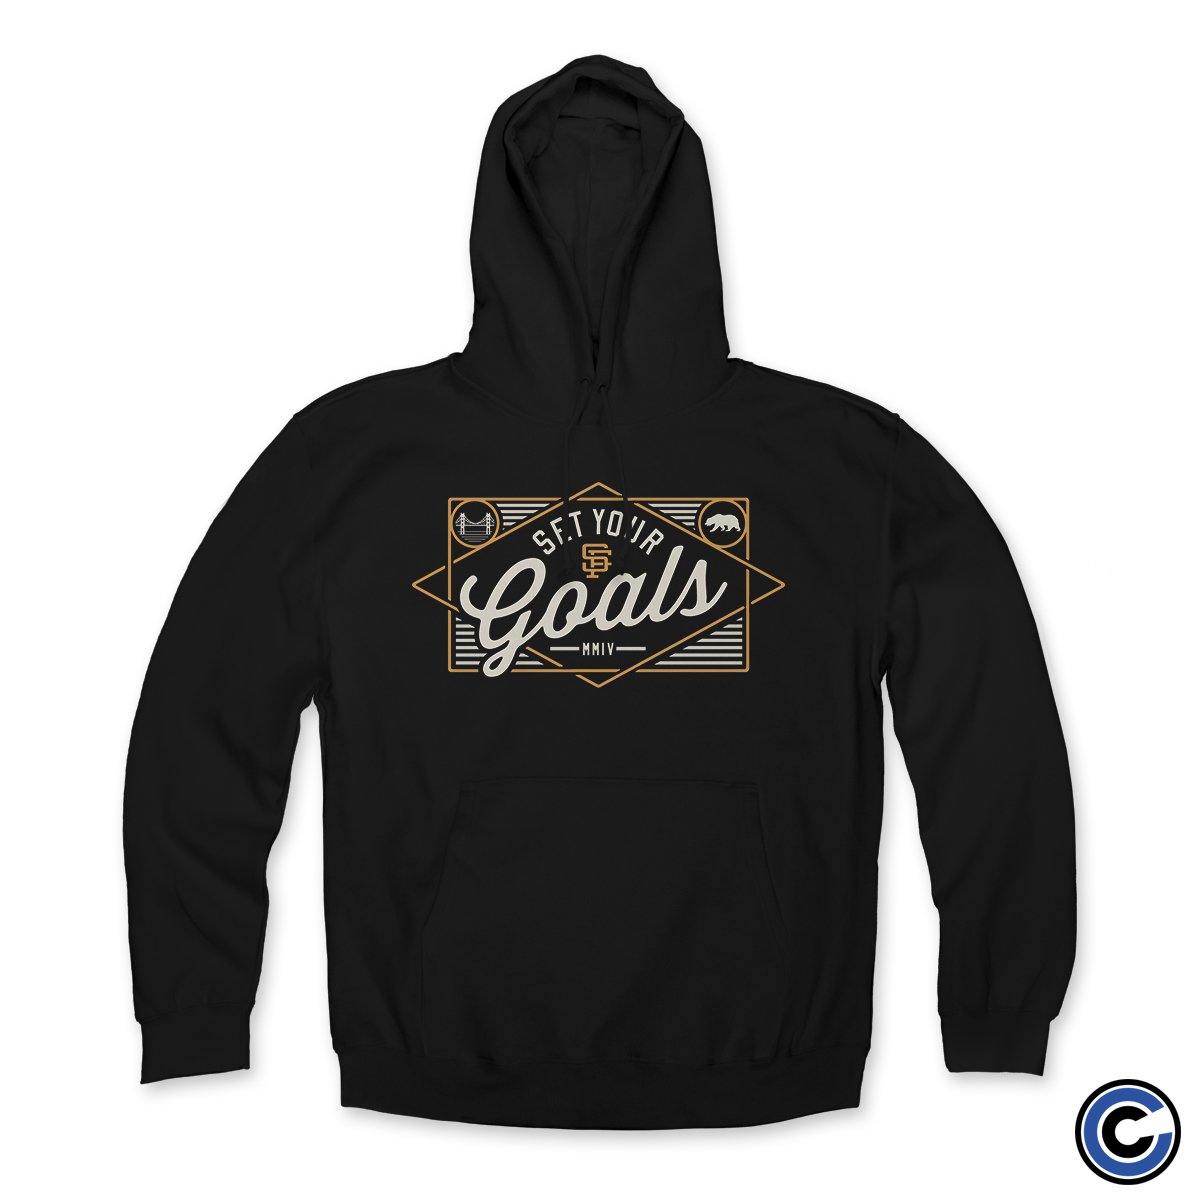 Buy – Set Your Goals "Icons" Hoodie – Band & Music Merch – Cold Cuts Merch